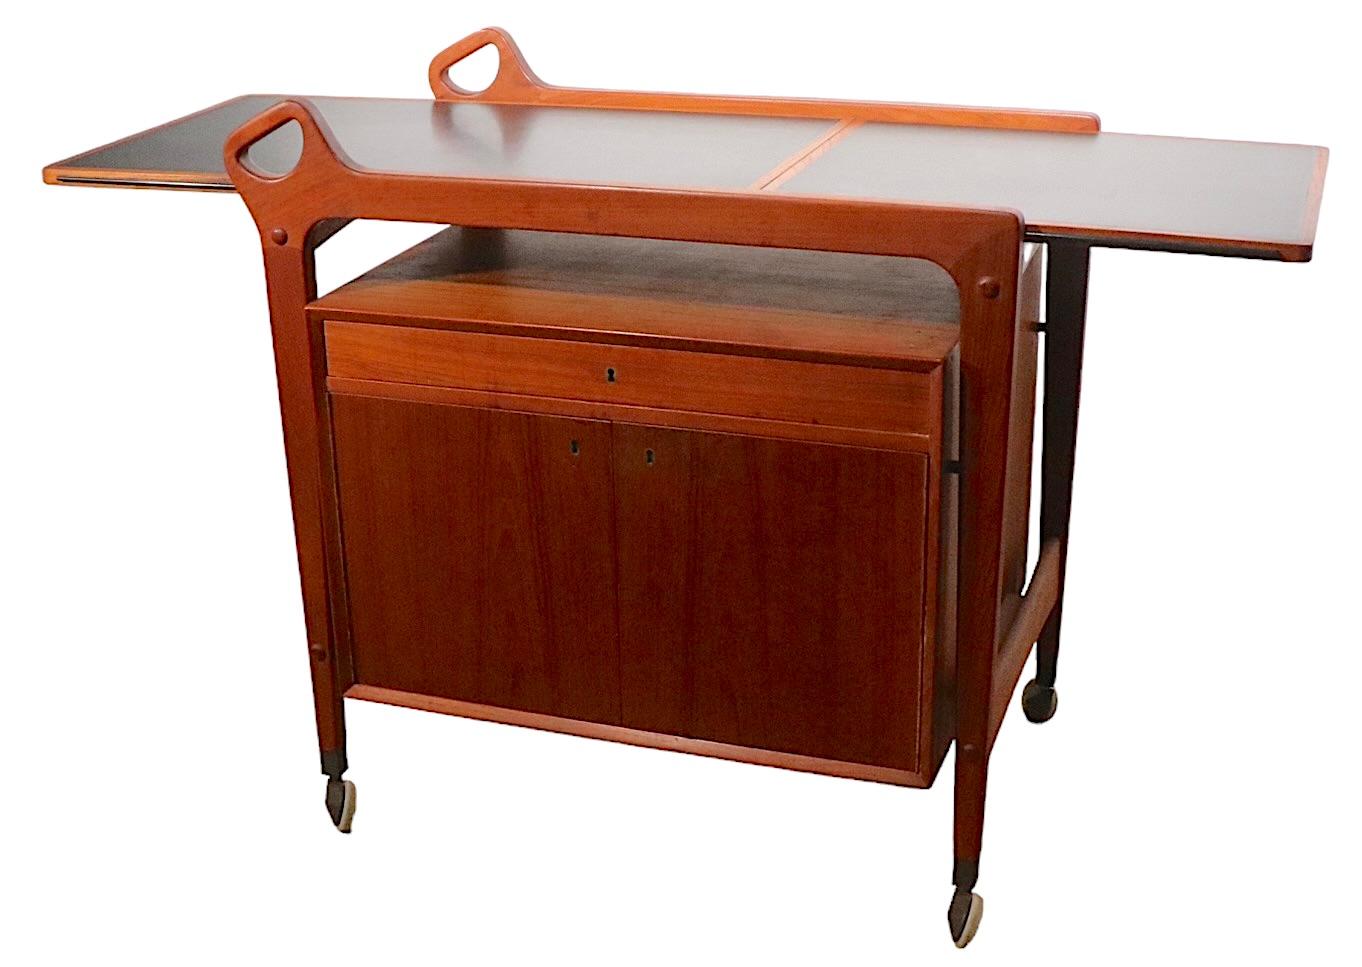 Exceptional bar, serving, cart in teak, with a black laminate top work surface. The cart features an extendable drop leaf surface creating plenty of room to mix drinks etc. Beneath the top is a lined pullout drawer, over a spacious two door cabinet.